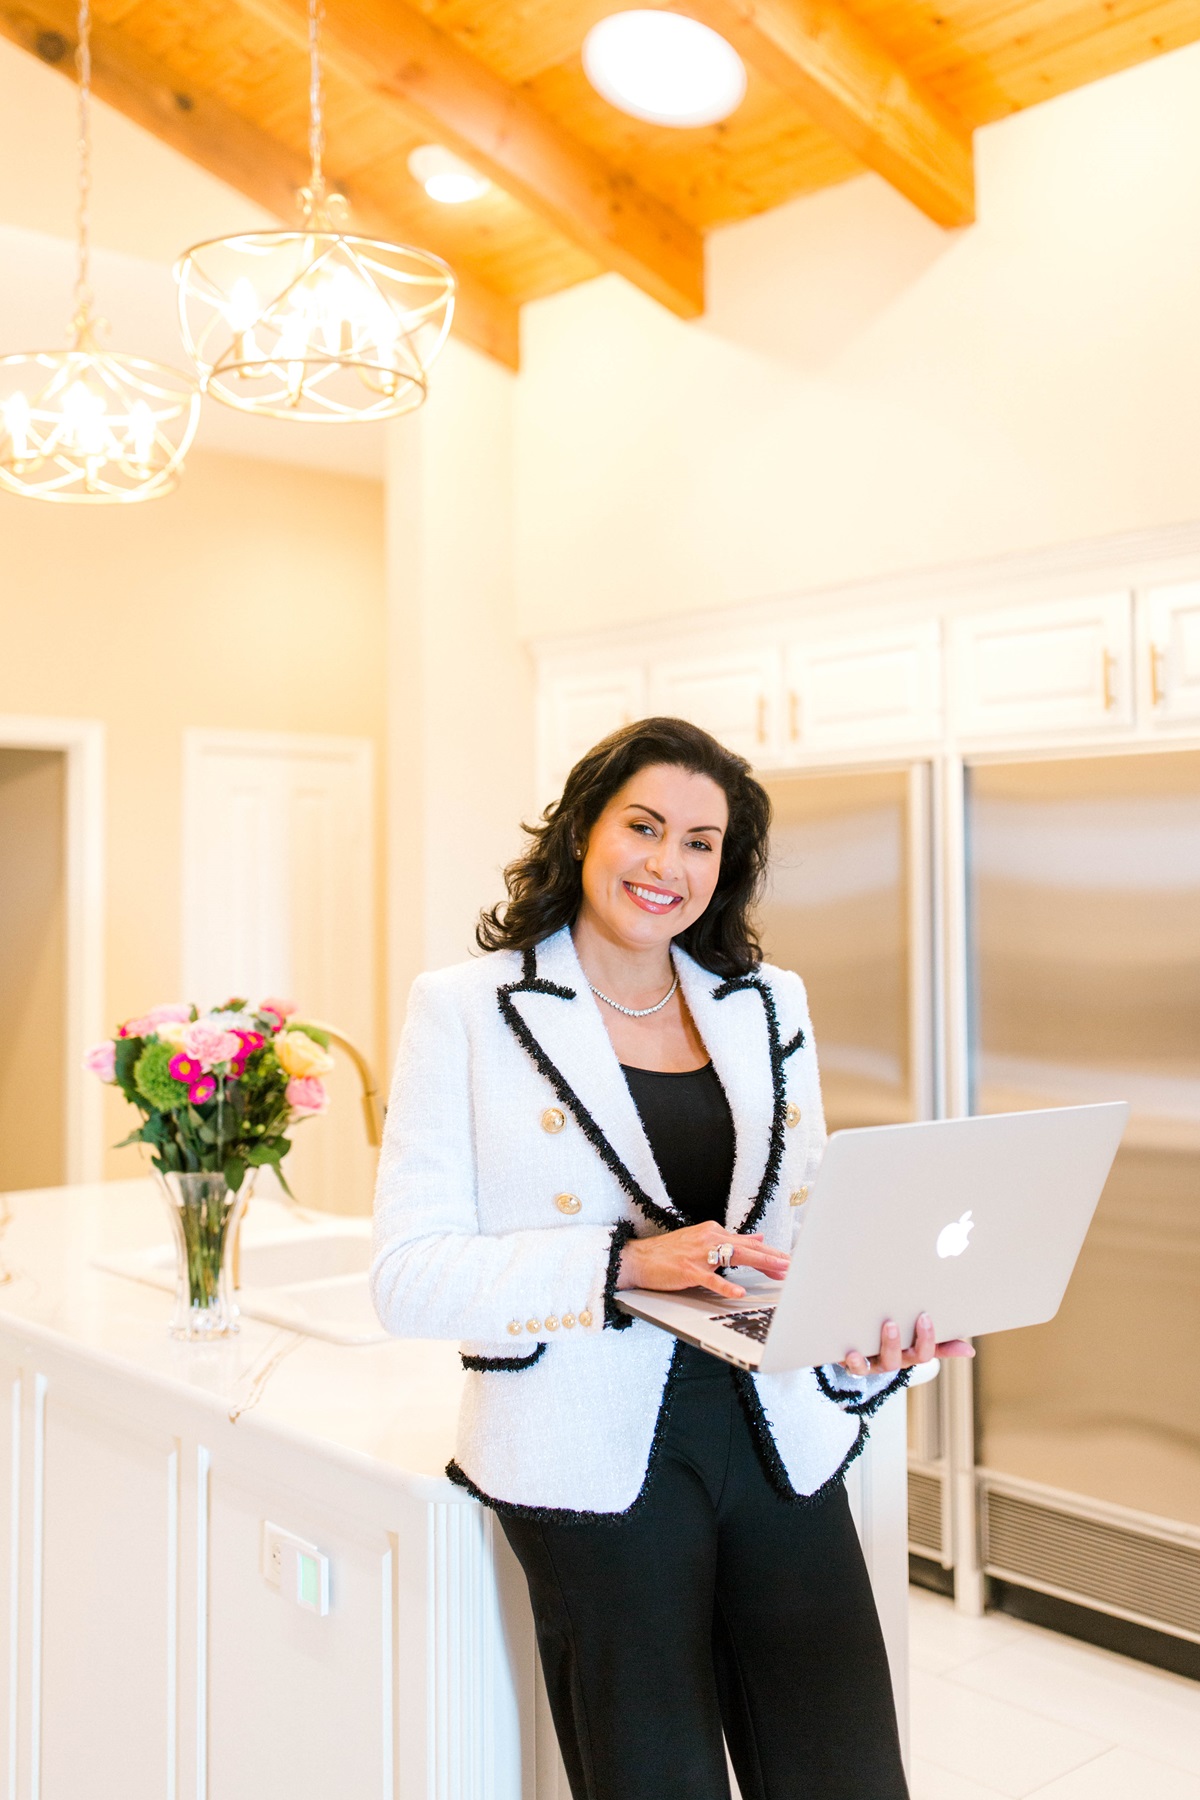 Yvette Wolfe: Your Friendly Neighborhood Realtor® Ready to Guide You Through Your Real Estate Journey